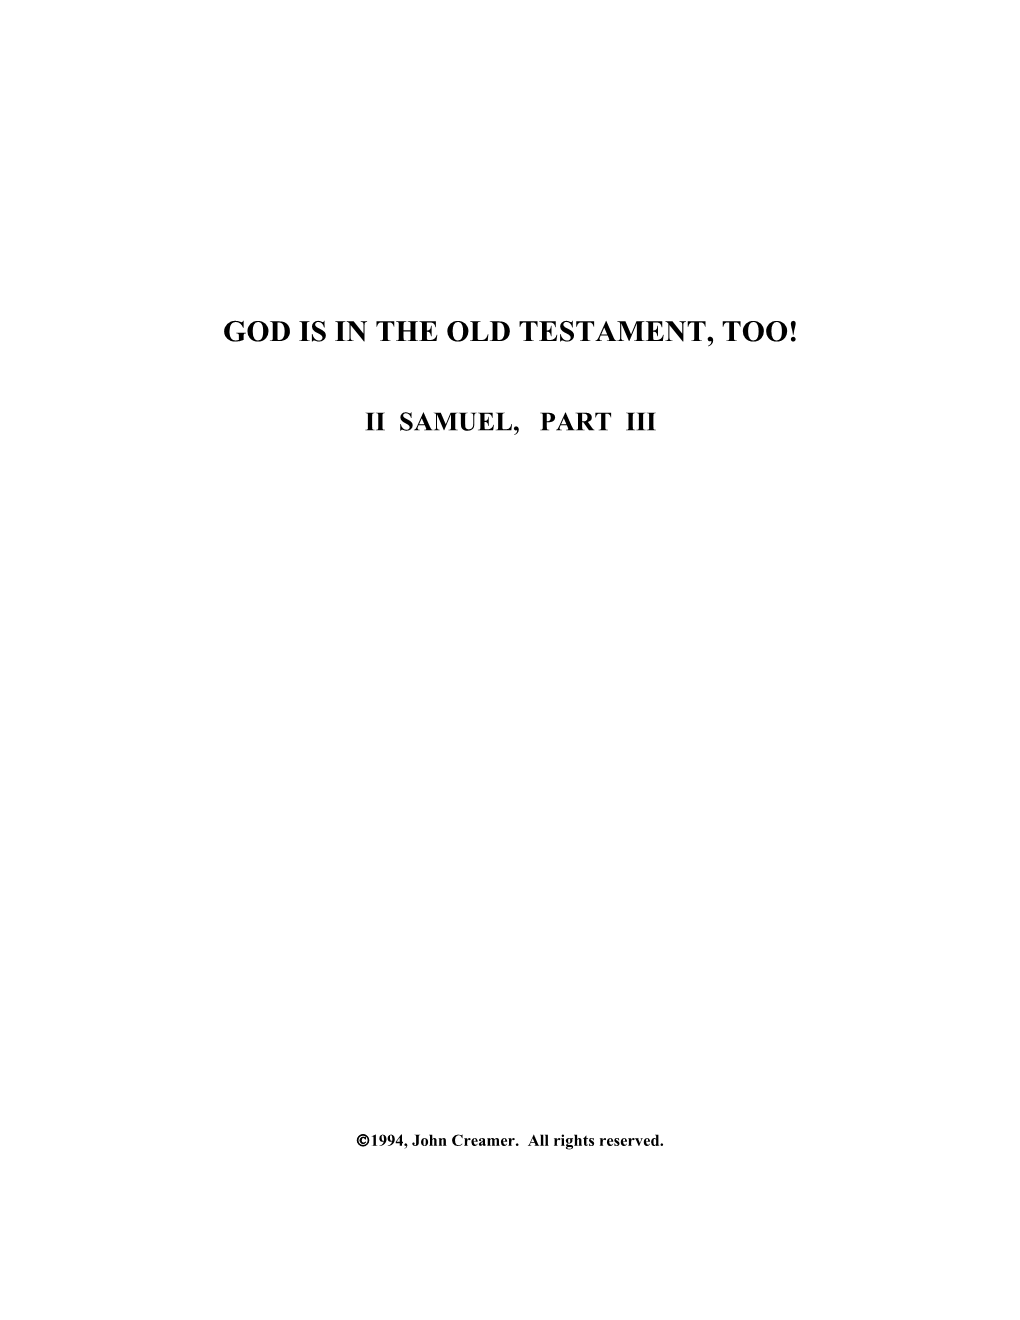 God Is in the Old Testament, Too